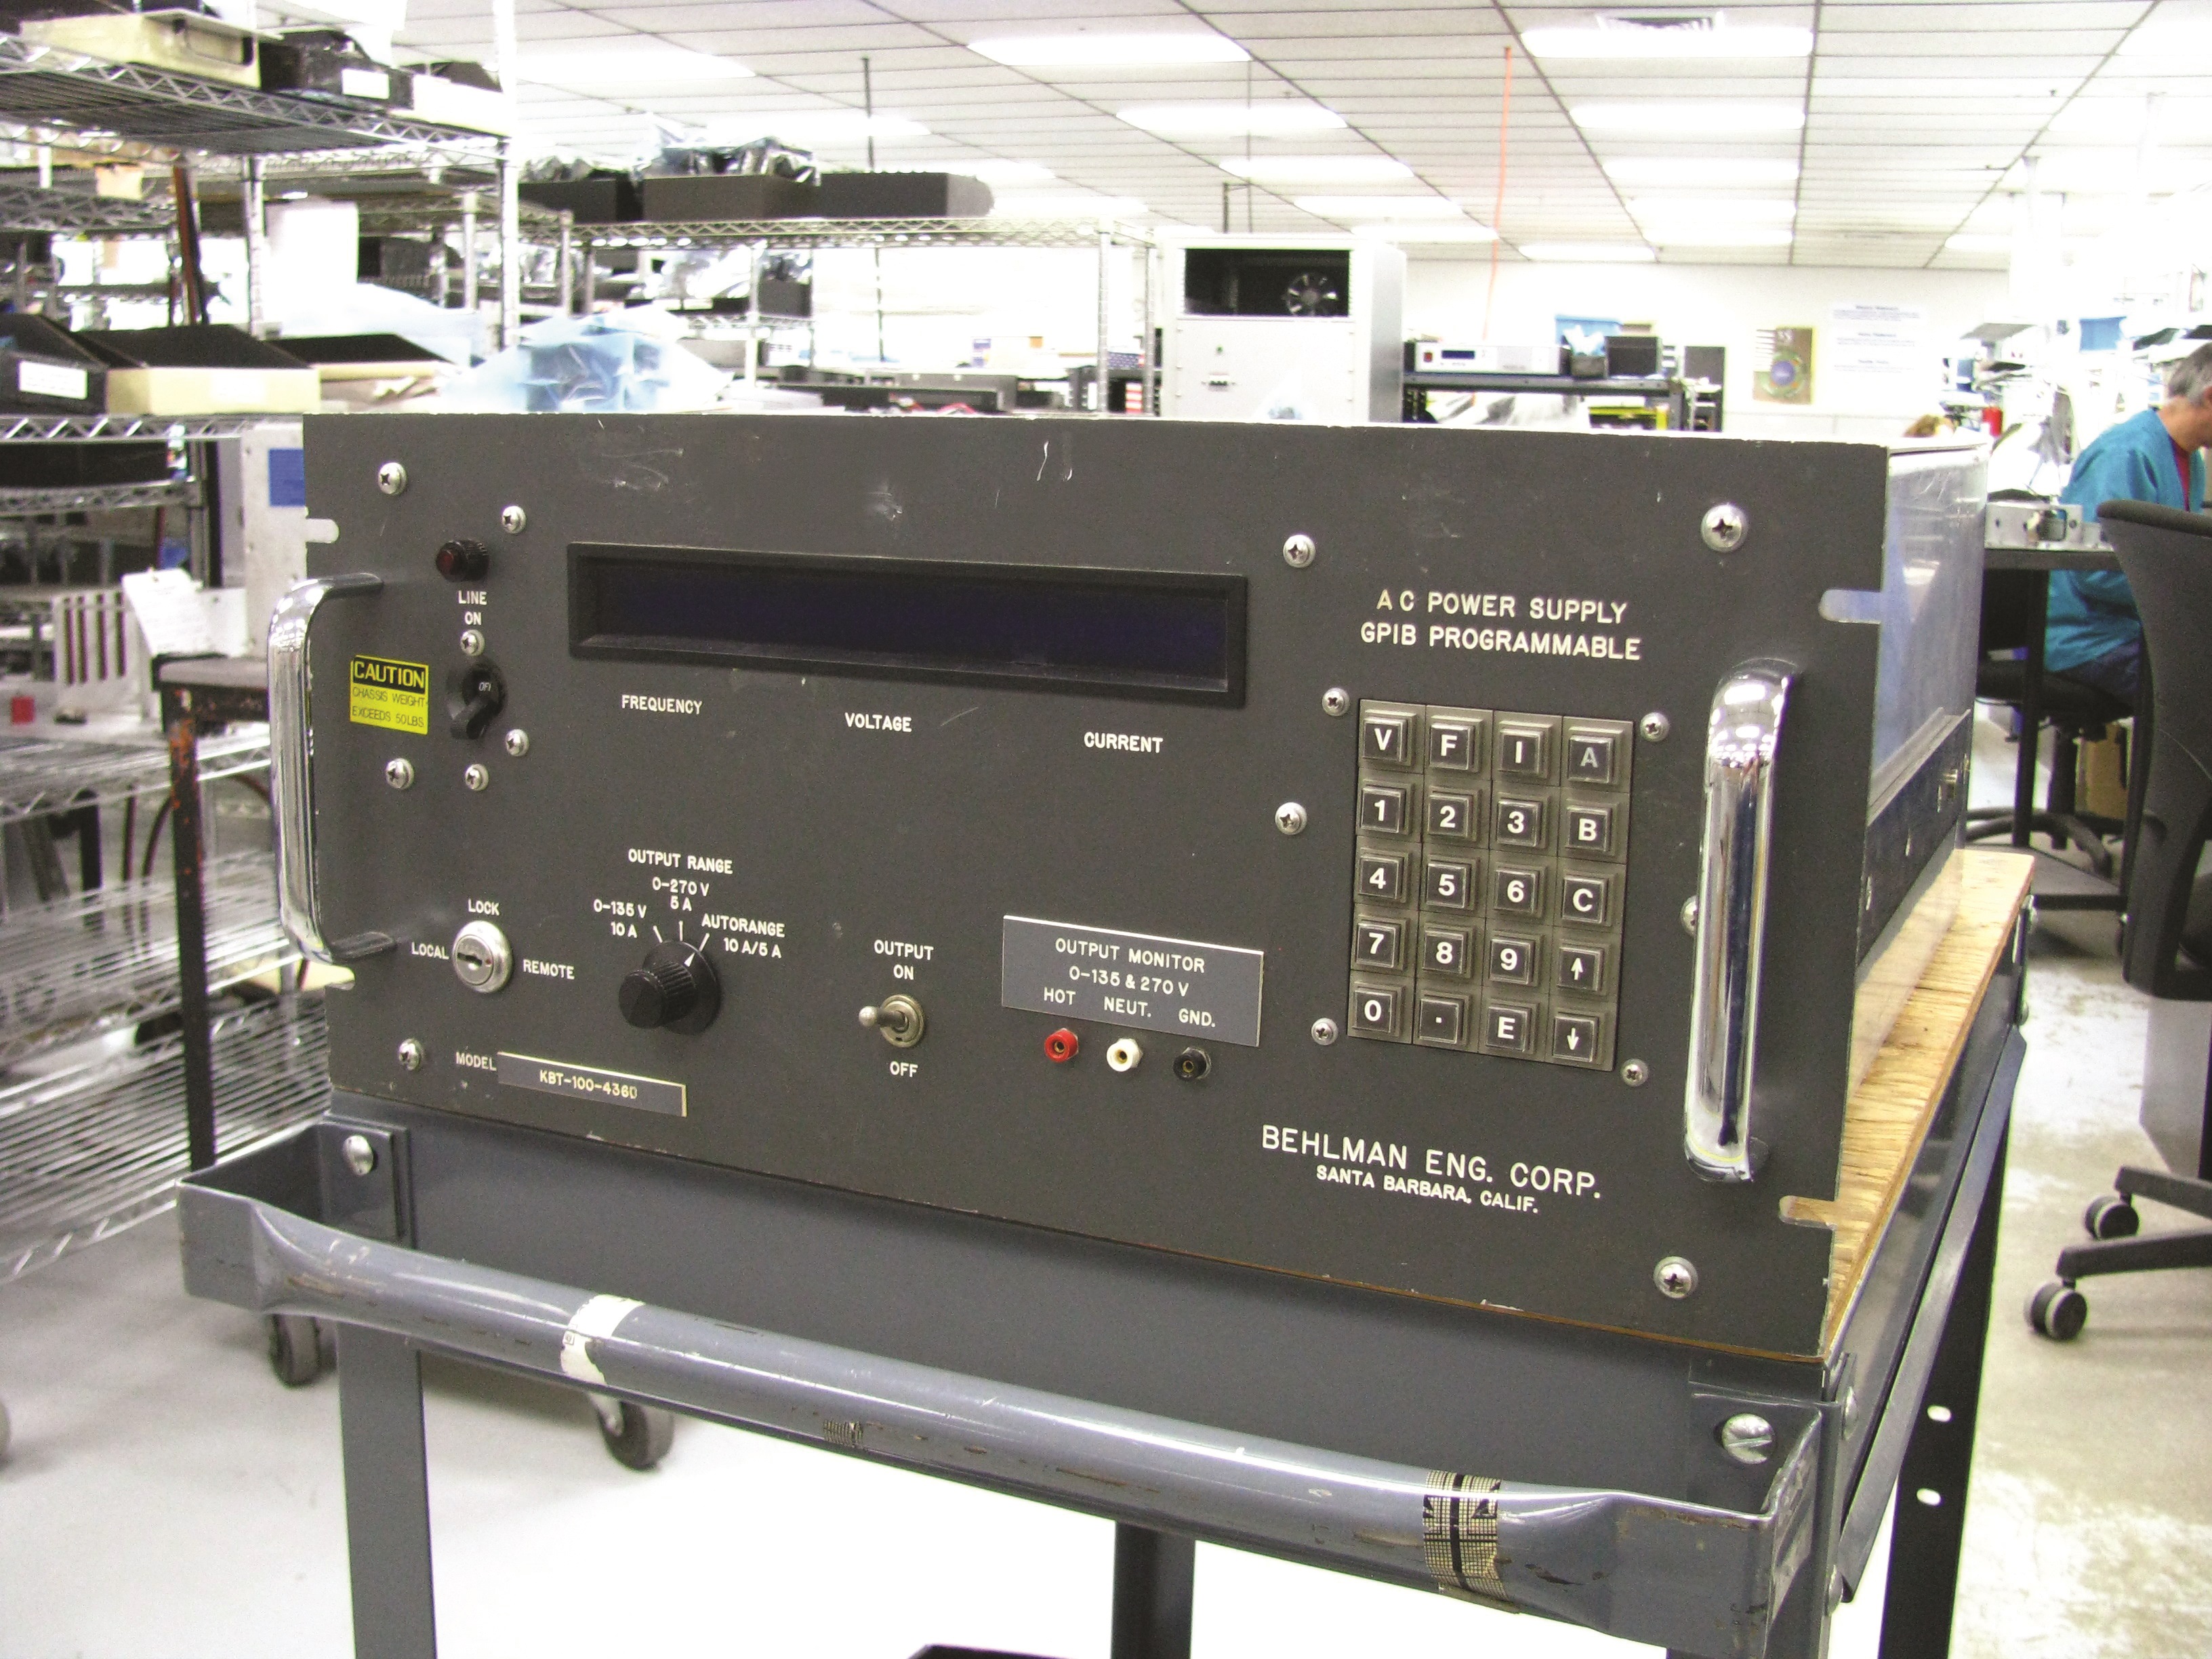 These Behlman Power Supplies have operated successfully in rugged environments worldwide, for more than three decades. In 2015, this one arrived at the Behlman Factory Service Center for a tune-up.